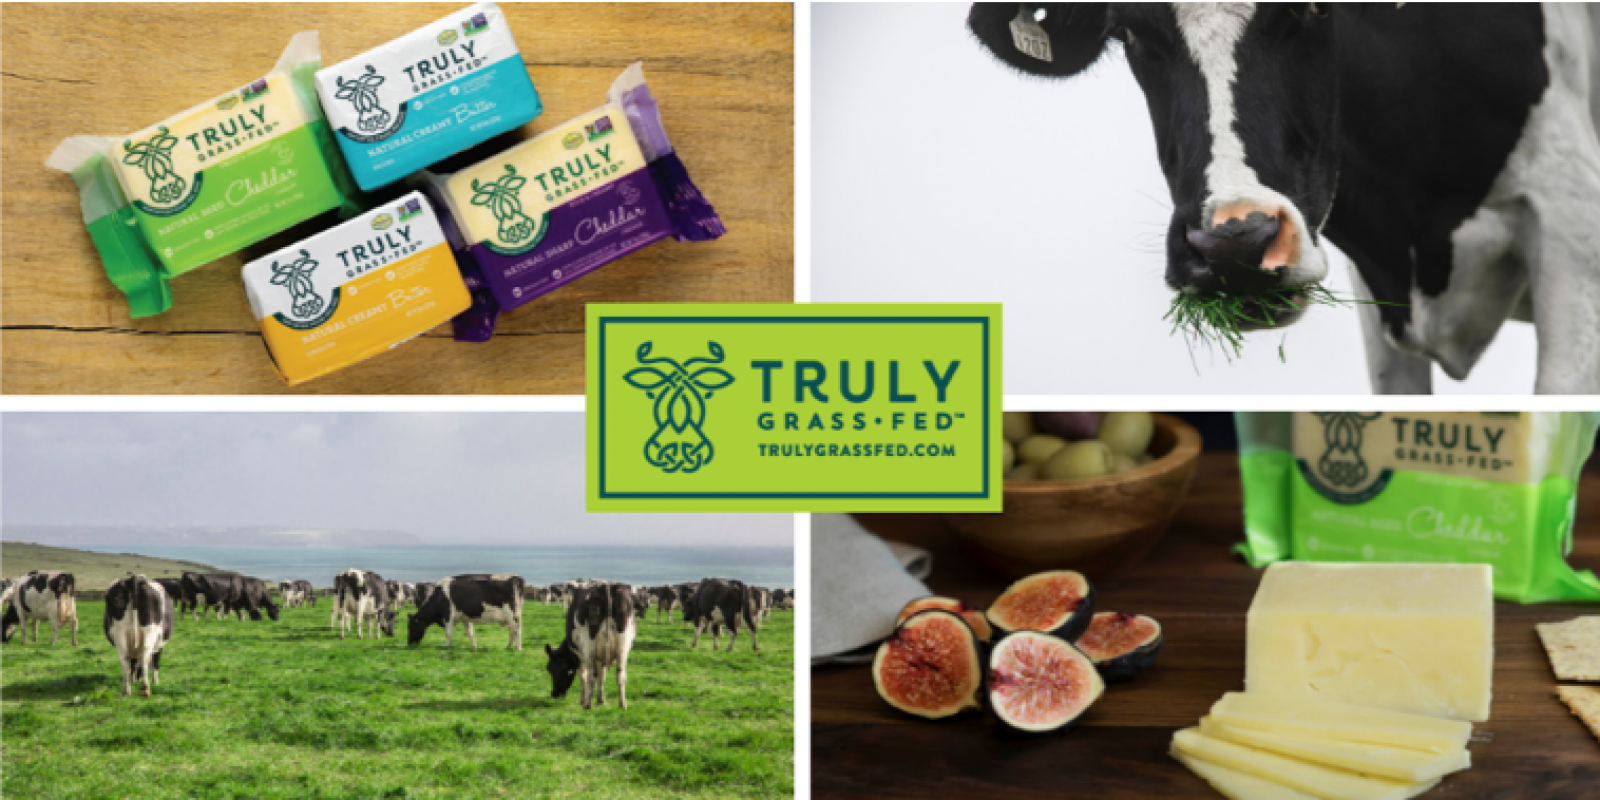 Collage of 4 images featuring Truly Grass Fed imagery. From top left: image of Truly Grass Fed butter and cheese; close-up of cow eating grass; group of cows grazing in a green field; close-up of Truly Grass Fed cheese sitting on a cheese board. In the middle of the collage is the Truly Grass Fed logo.